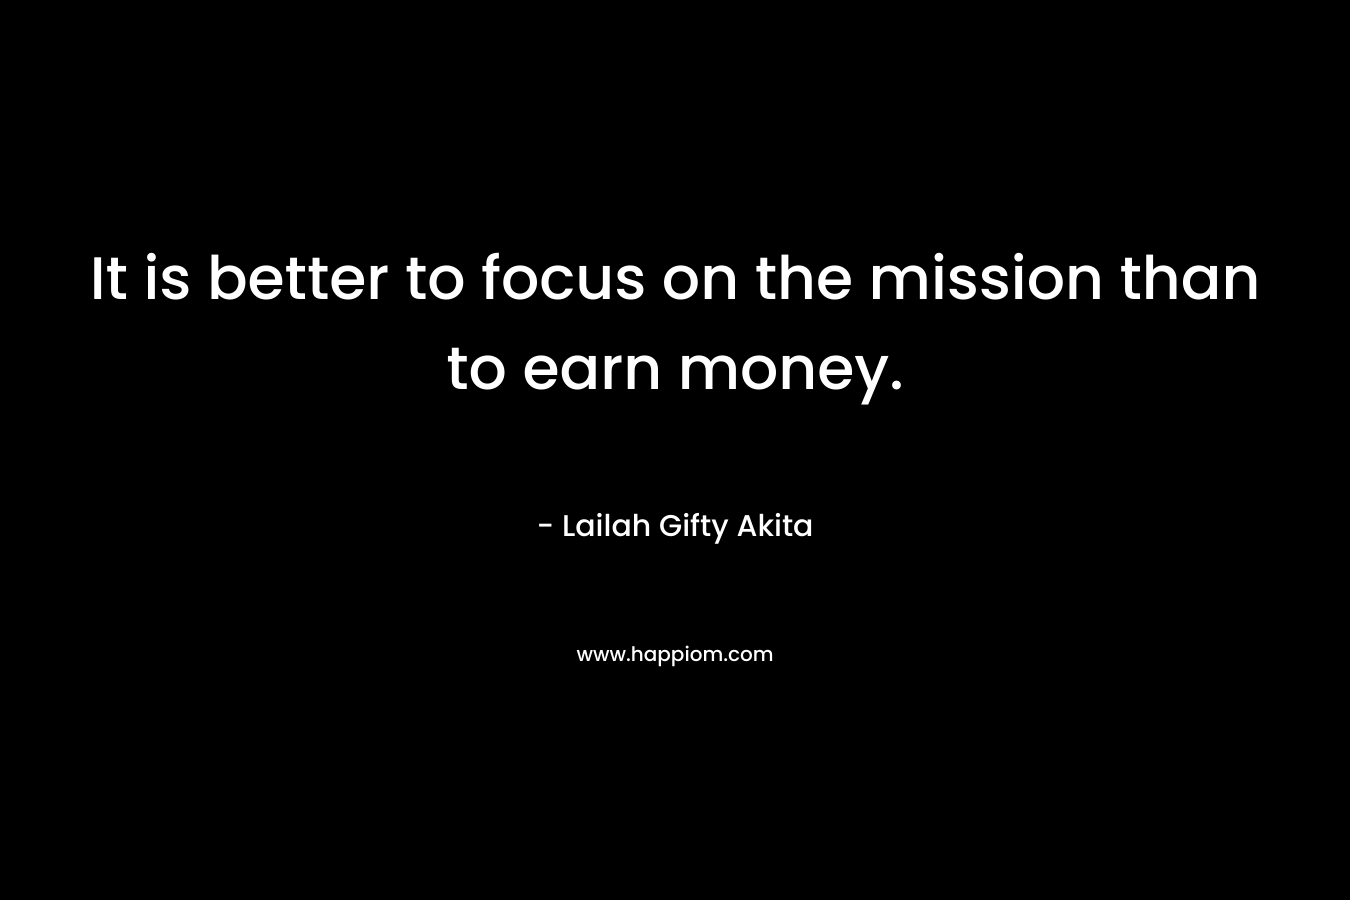 It is better to focus on the mission than to earn money.